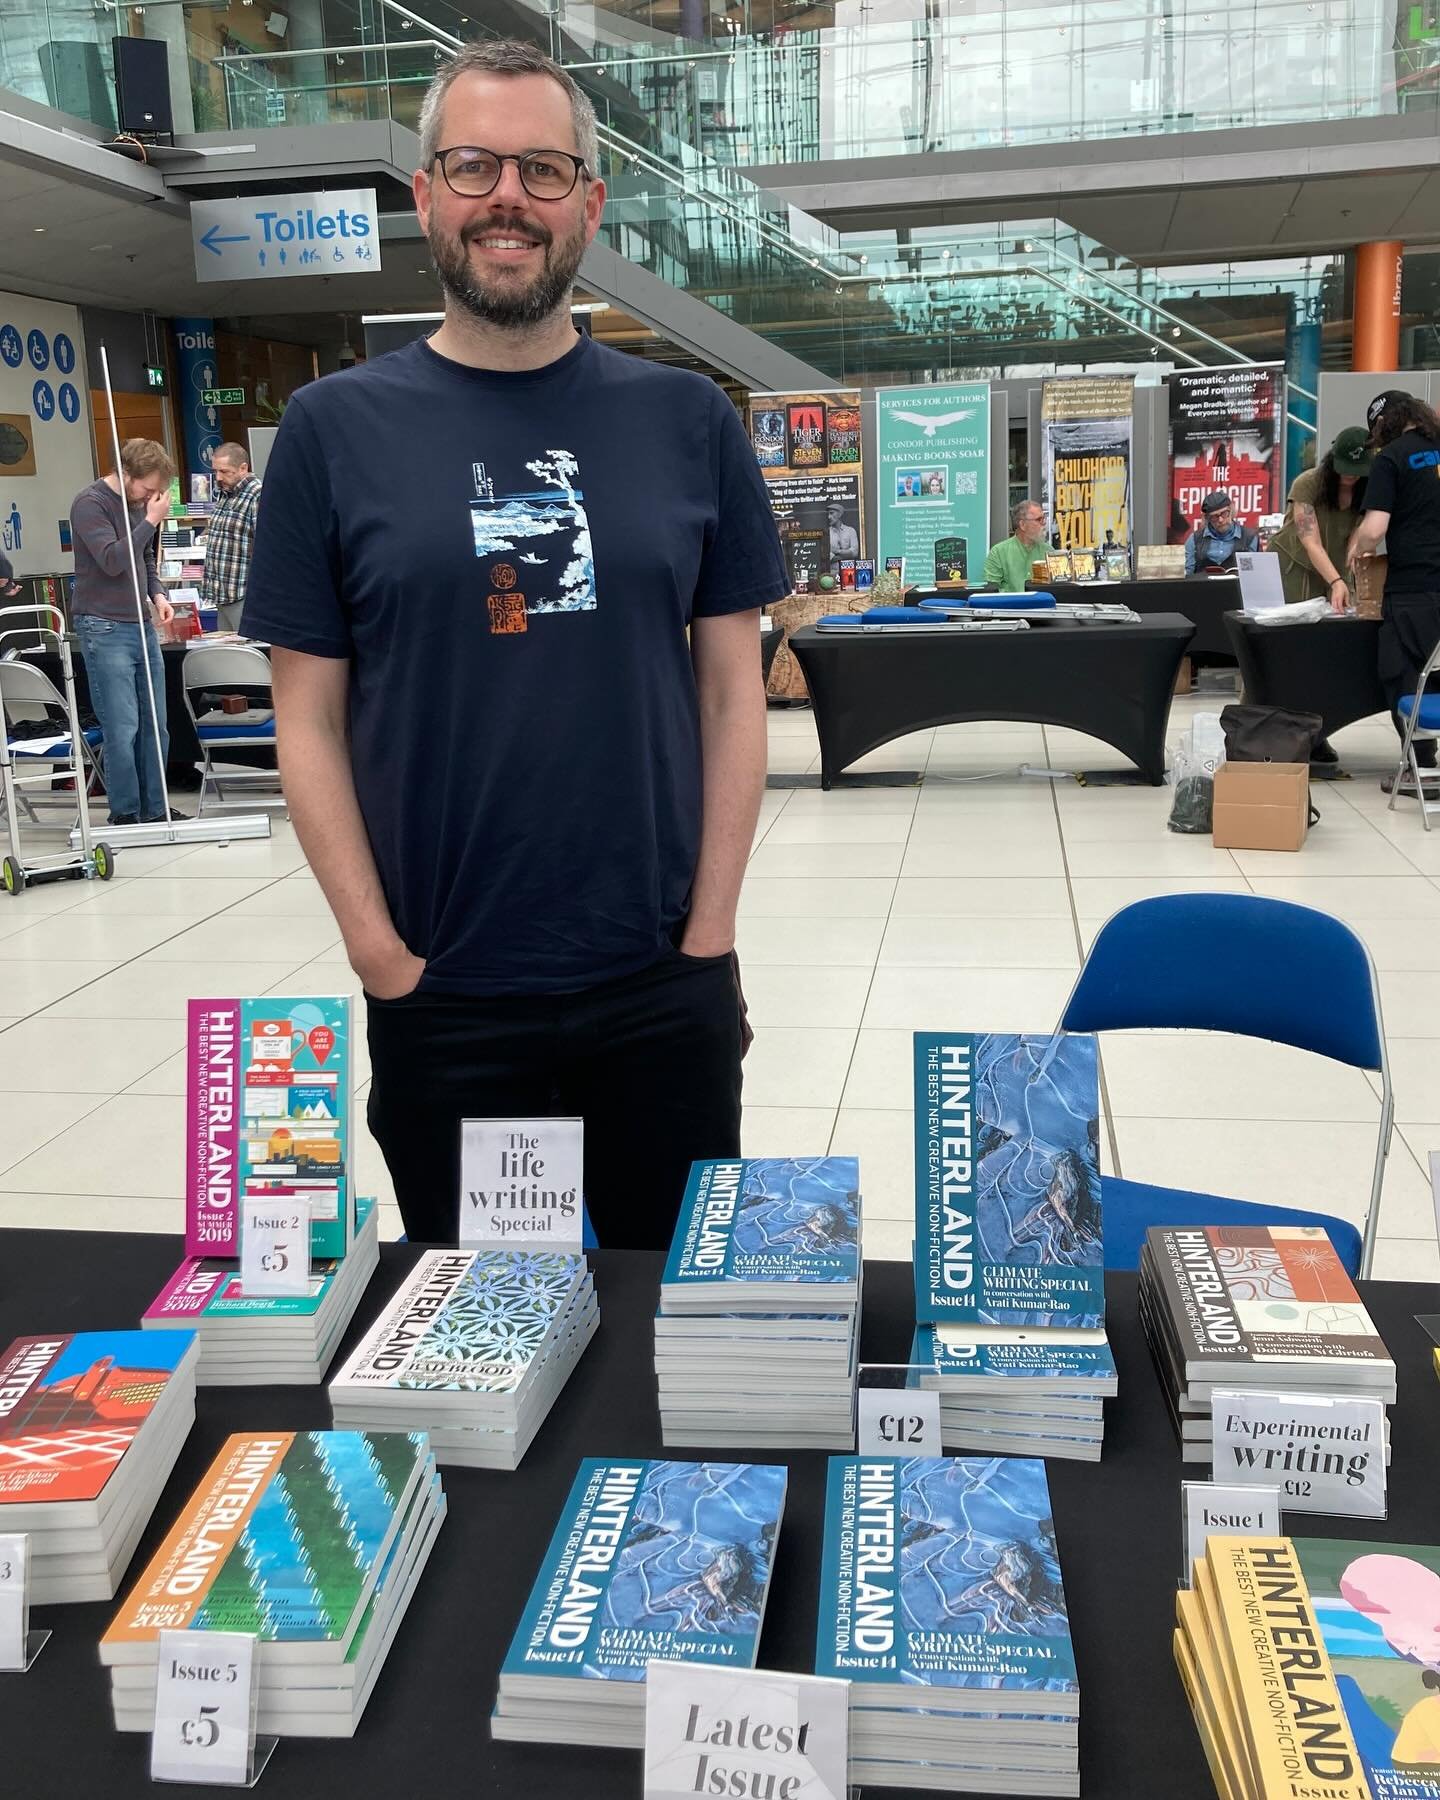 It was great to see so many of you yesterday at Norwich Independent Book &amp; Zine Fair @theforumnorwich - thanks so much for organising @salopress, see you next year!

#cityofliterature #literatureevent #selfpublishing #smallpresspublishing #hinter